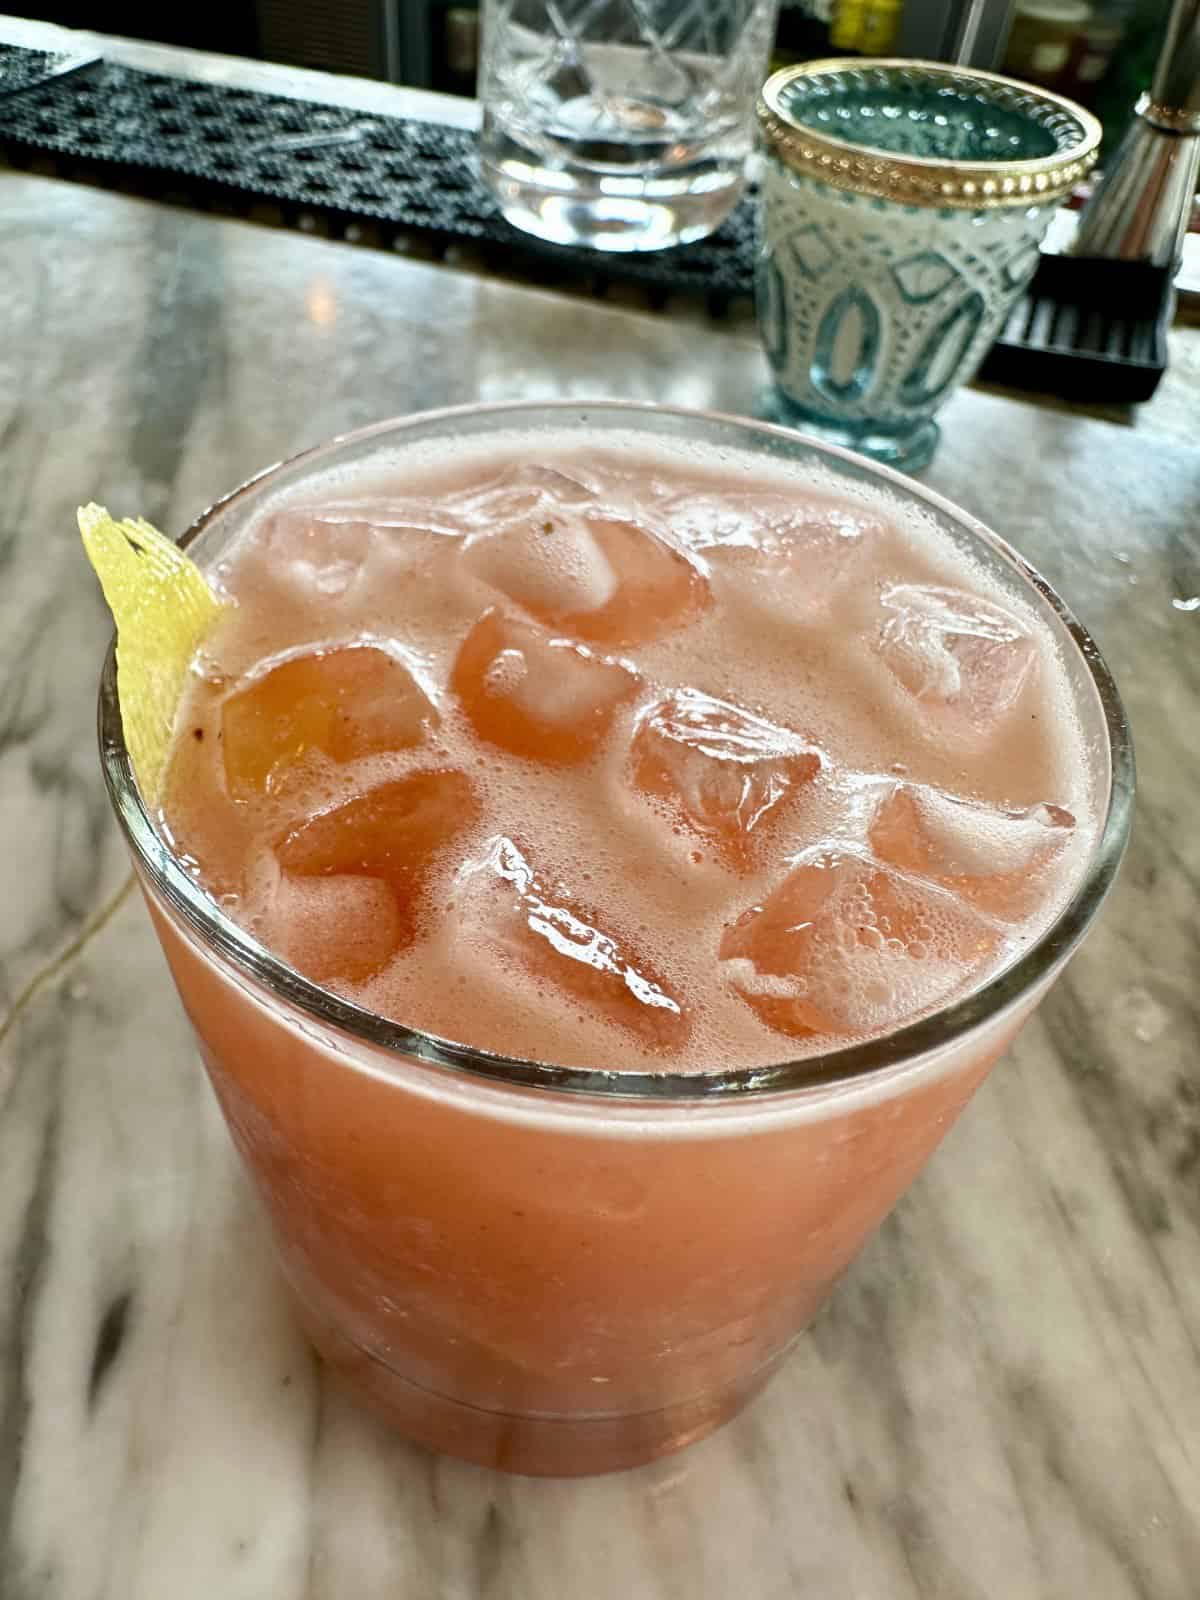 Where to eat & drink in Charleston, SC - both our food & cocktails at The Watch Rooftop were awesome